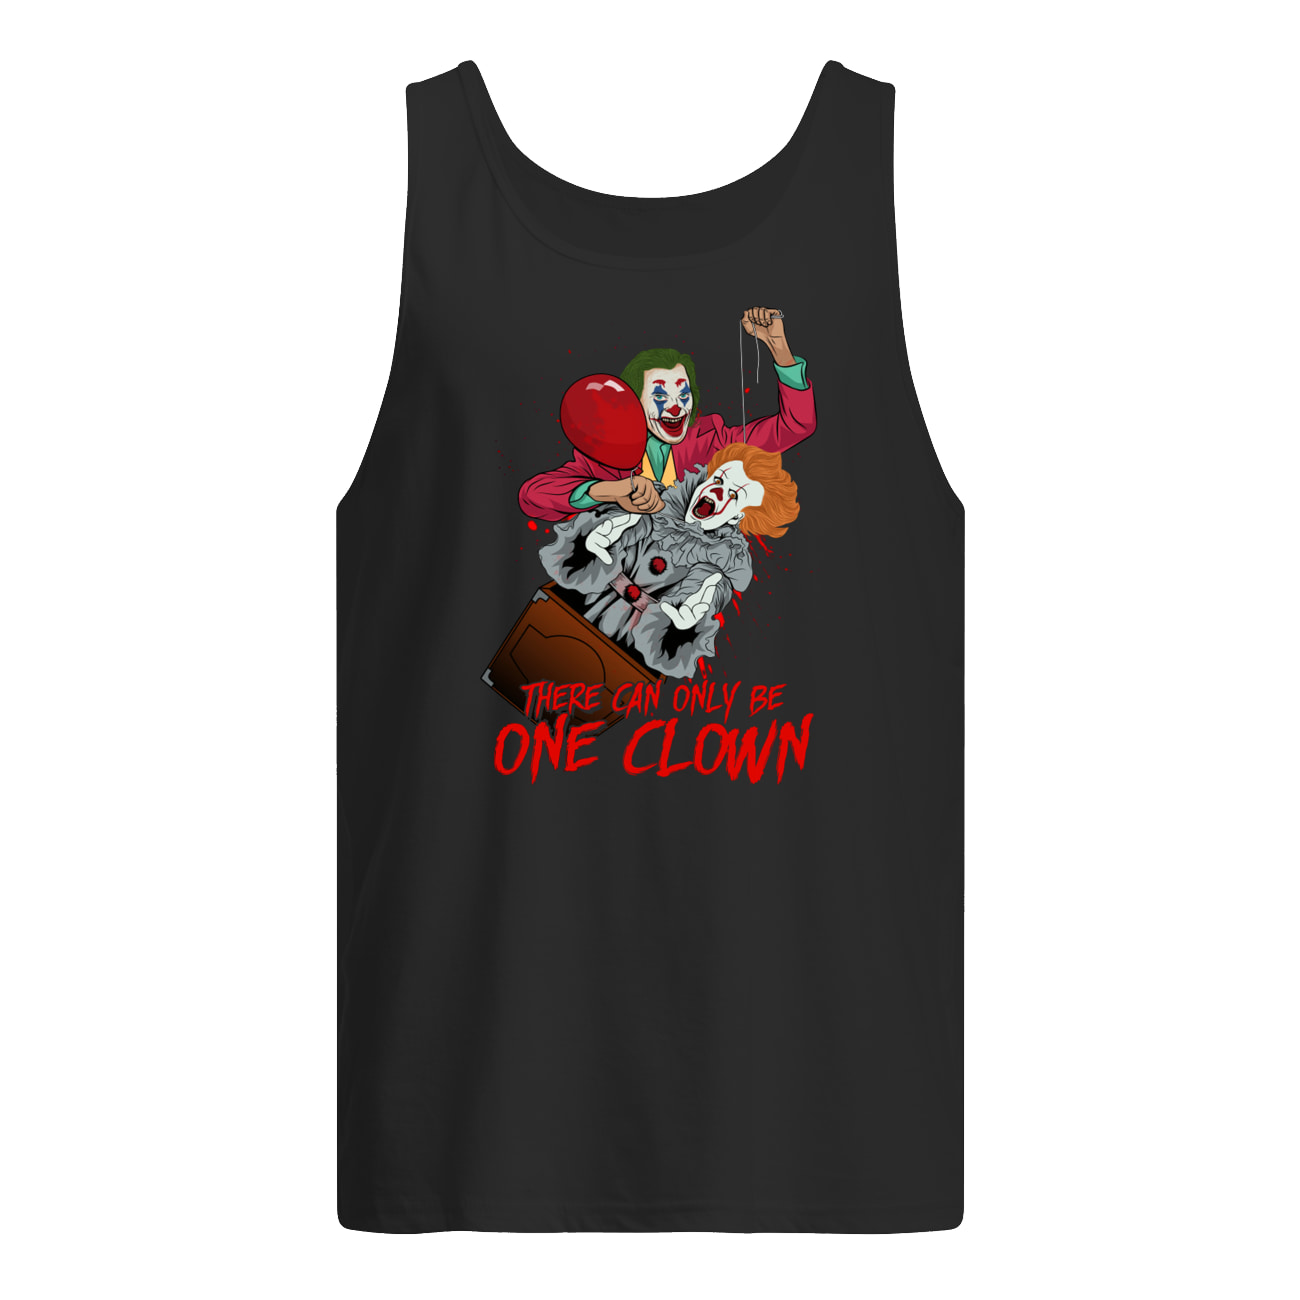 There can only be one clown pennywise and joker tank top